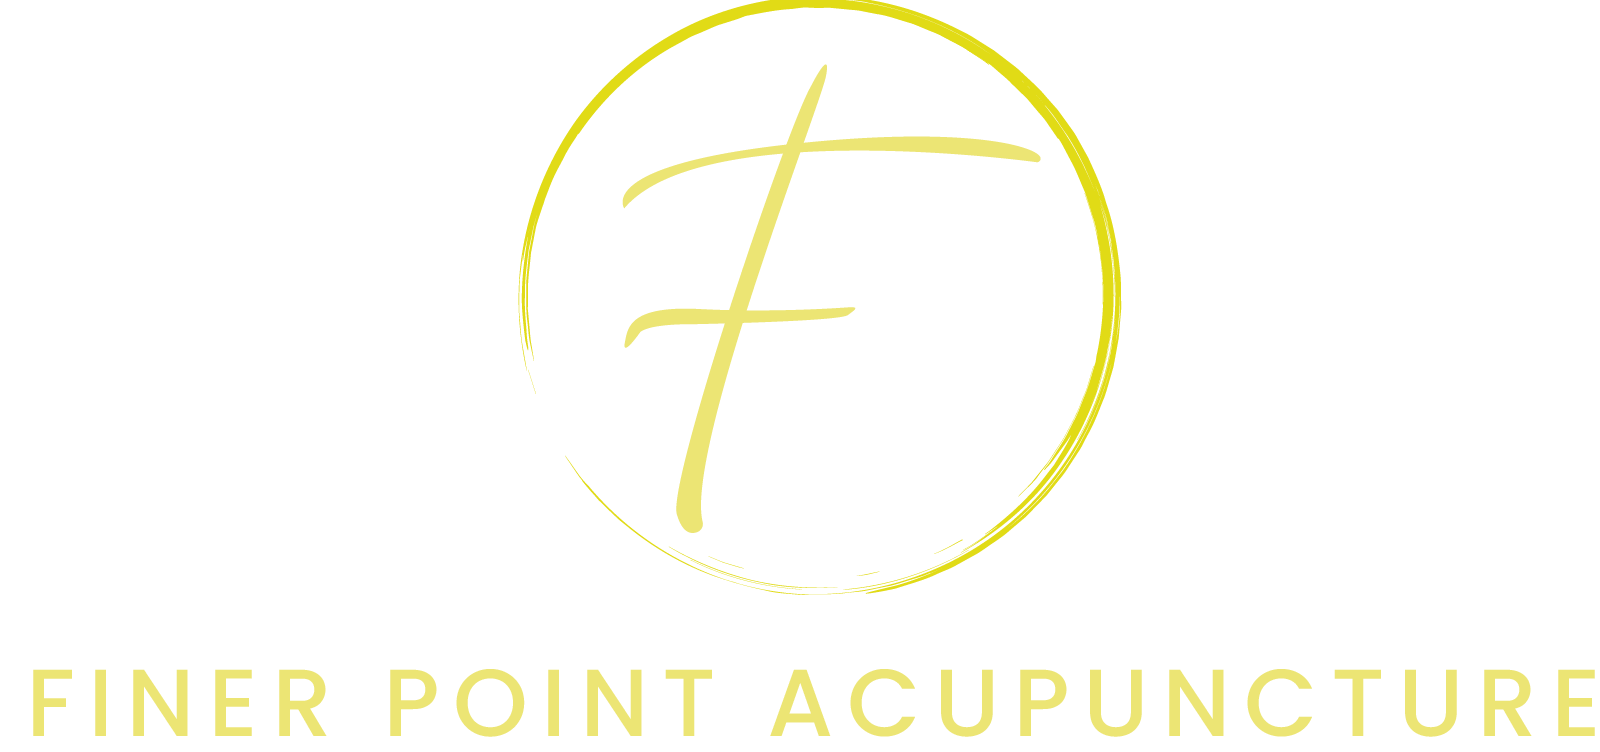 Finer Point Acupuncture